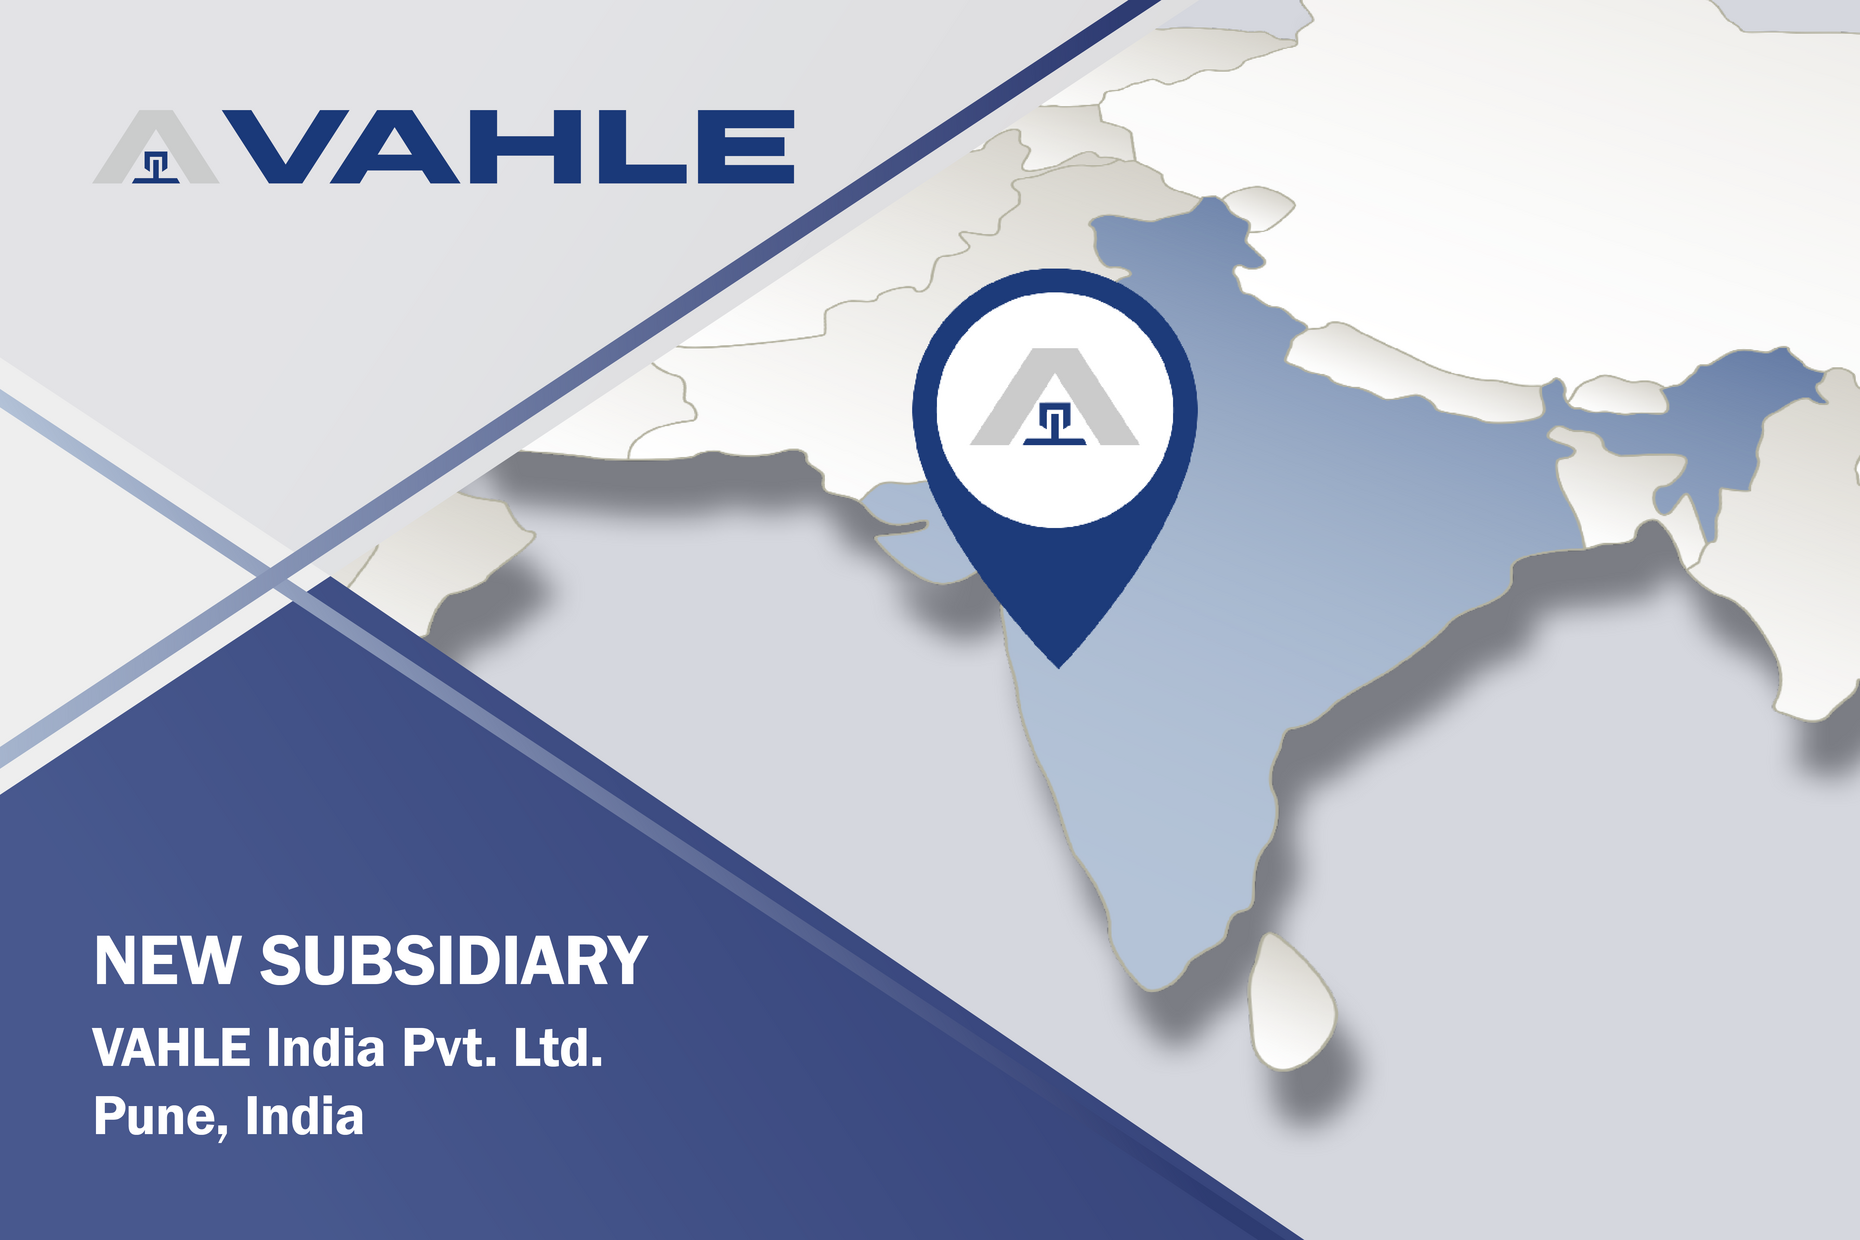 With the establishment of the Indian subsidiary Vahle India Pvt. Ltd. the VAHLE Group strengthens its market position in India. (Photo: VAHLE)